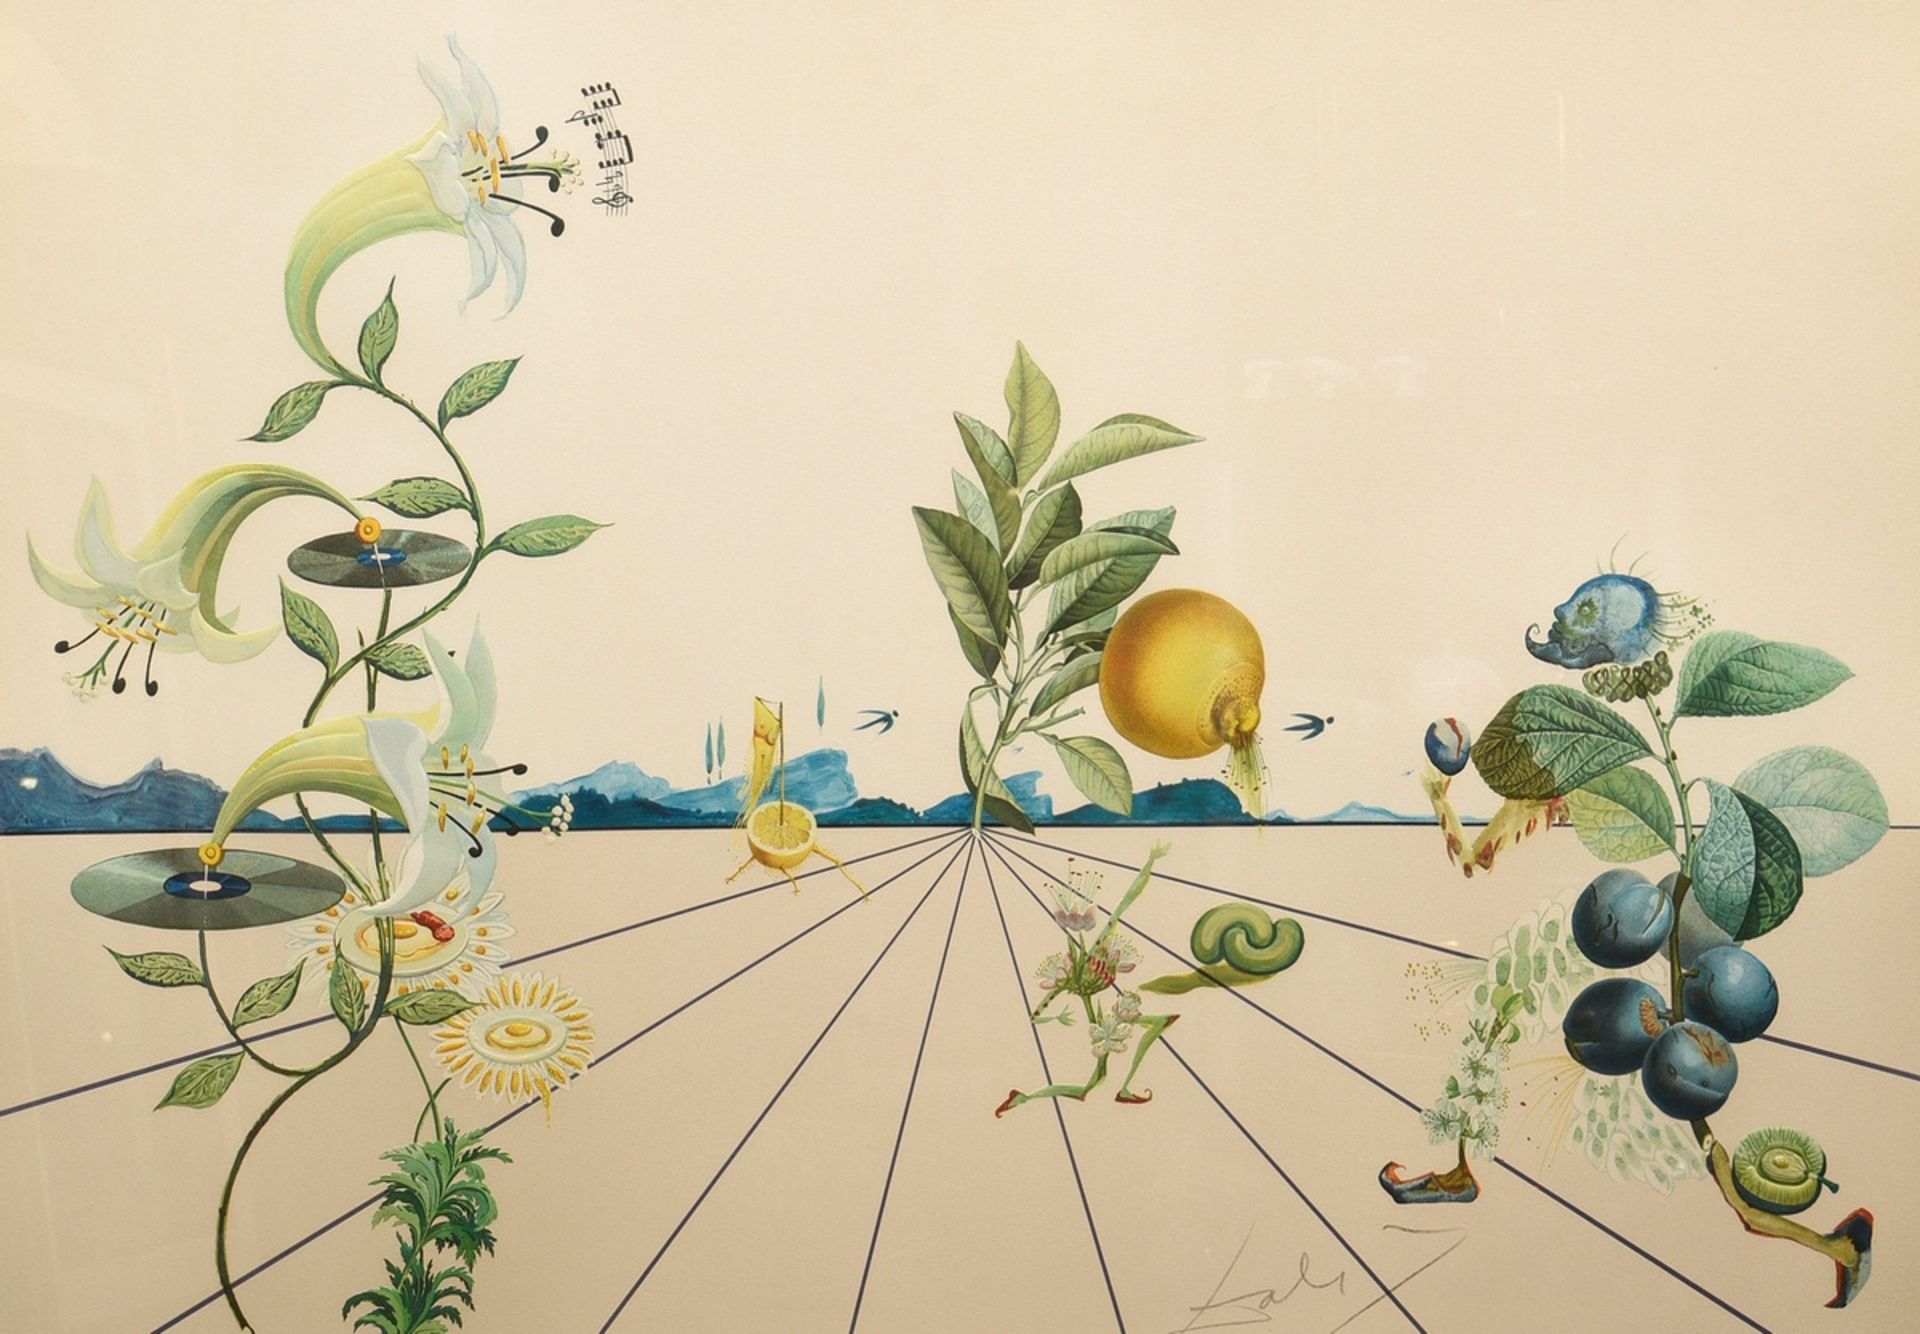 Dalí, Salvador (1904-1989) "Flordali I" 1981, colour lithograph with relief embossing, 2458/4480, s